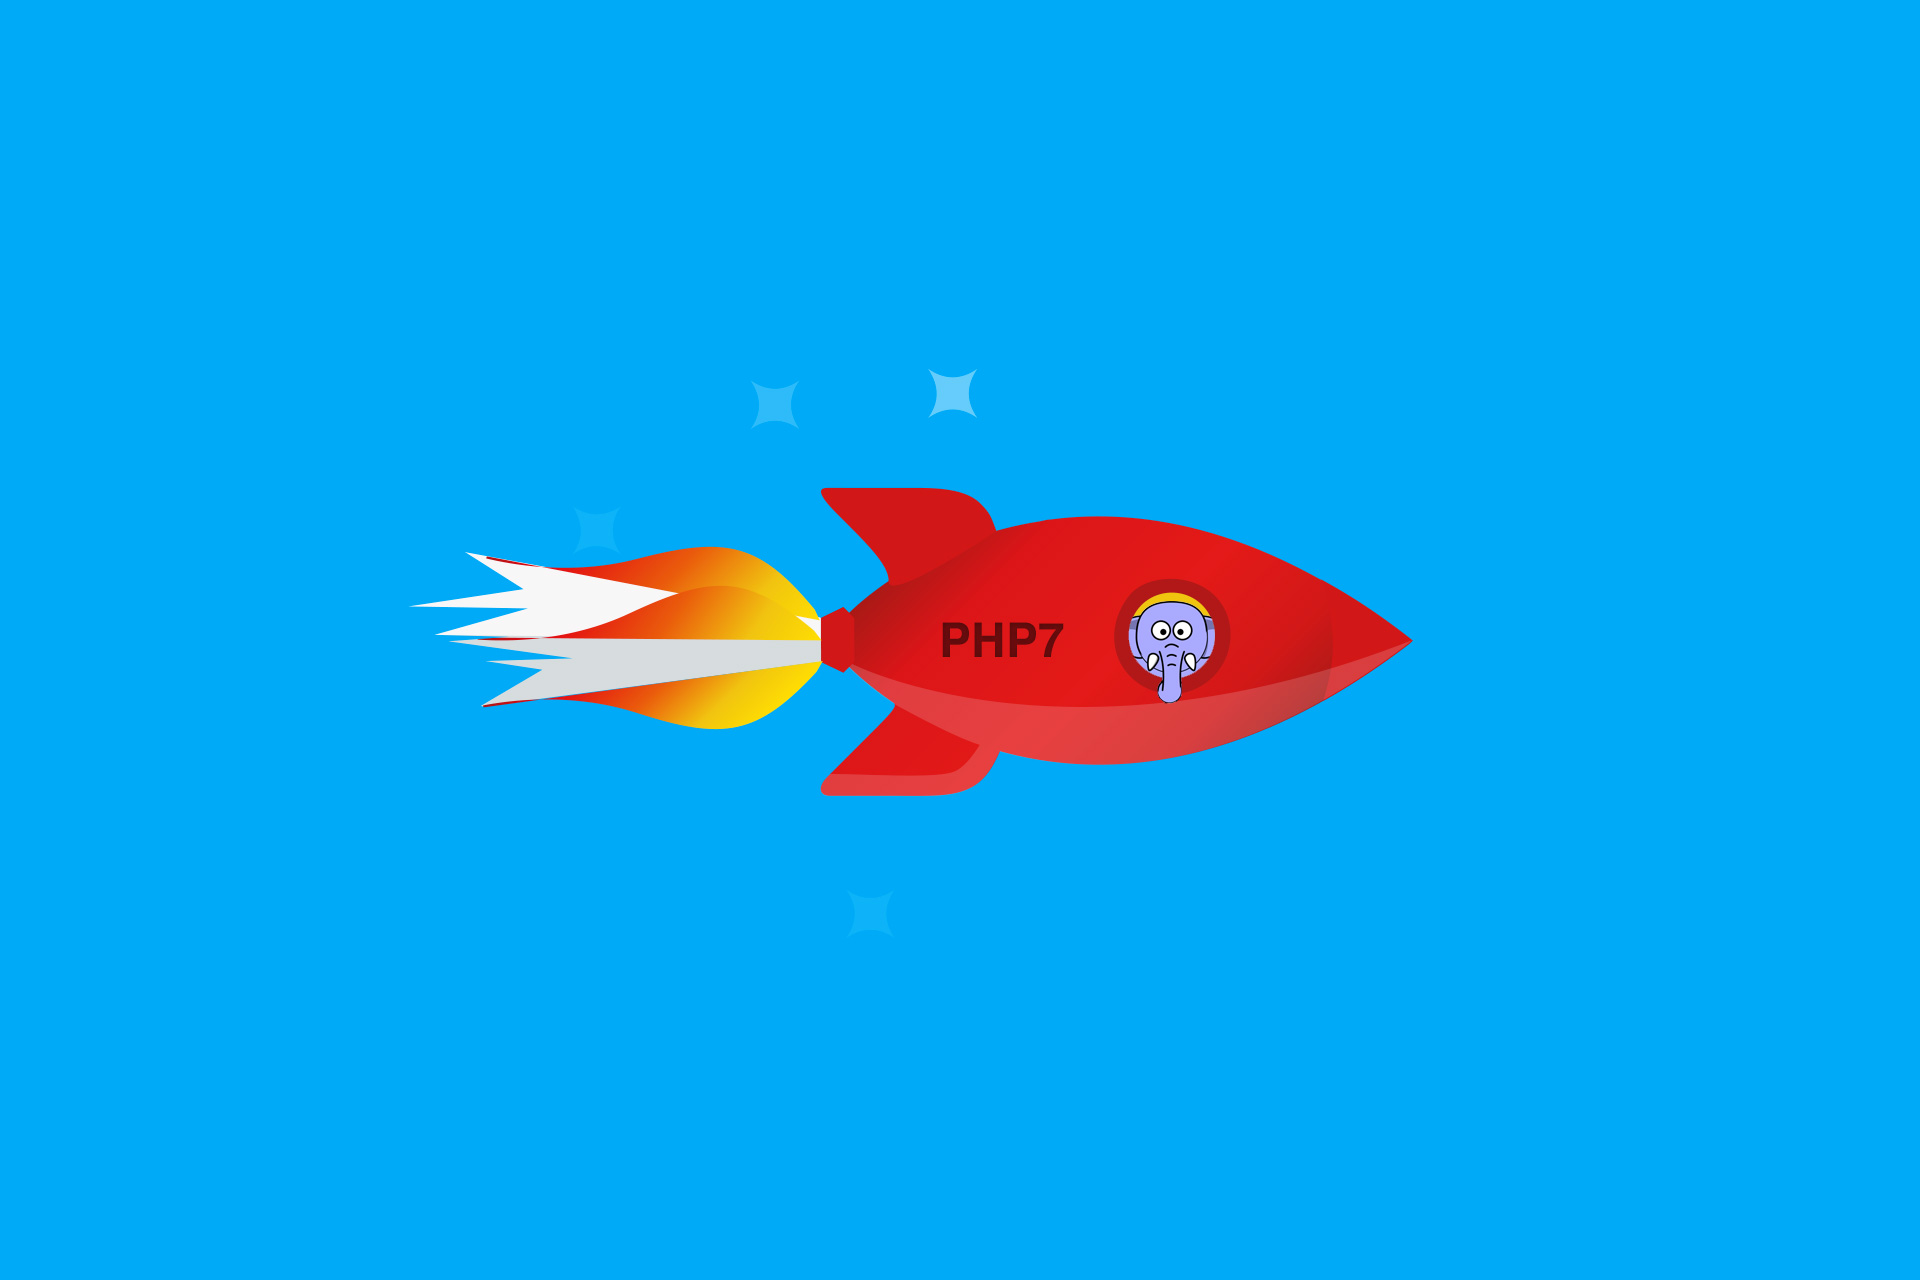 PHP 7